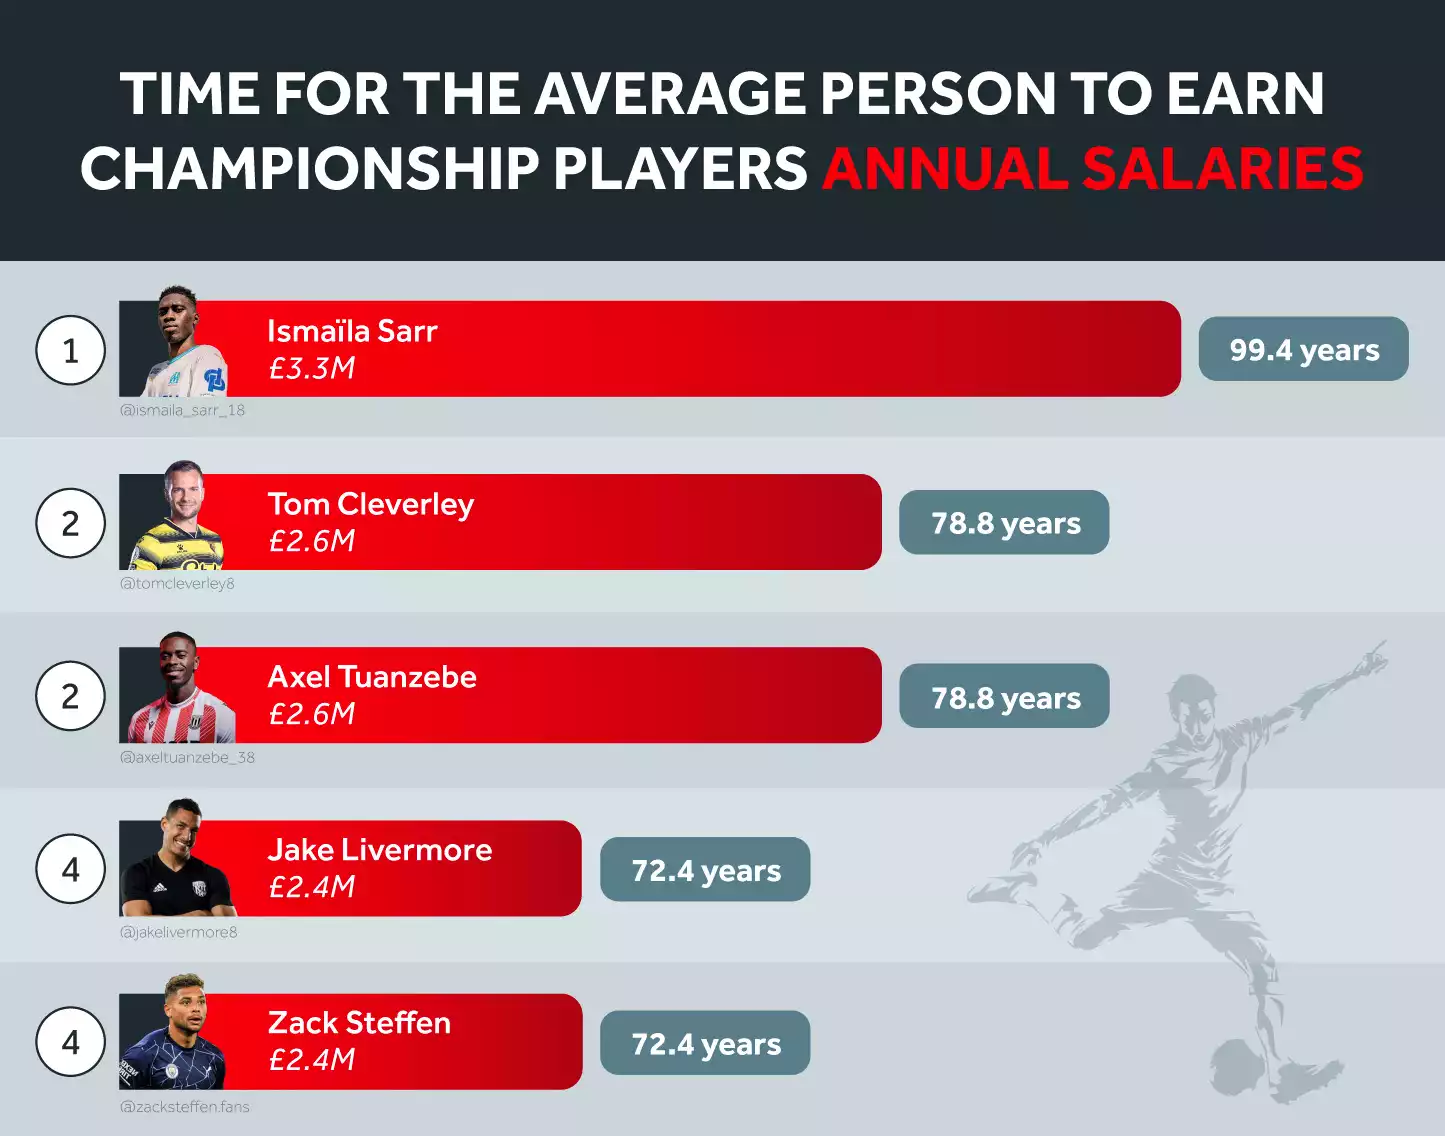 Top-earning Championship Players Annual Salaries